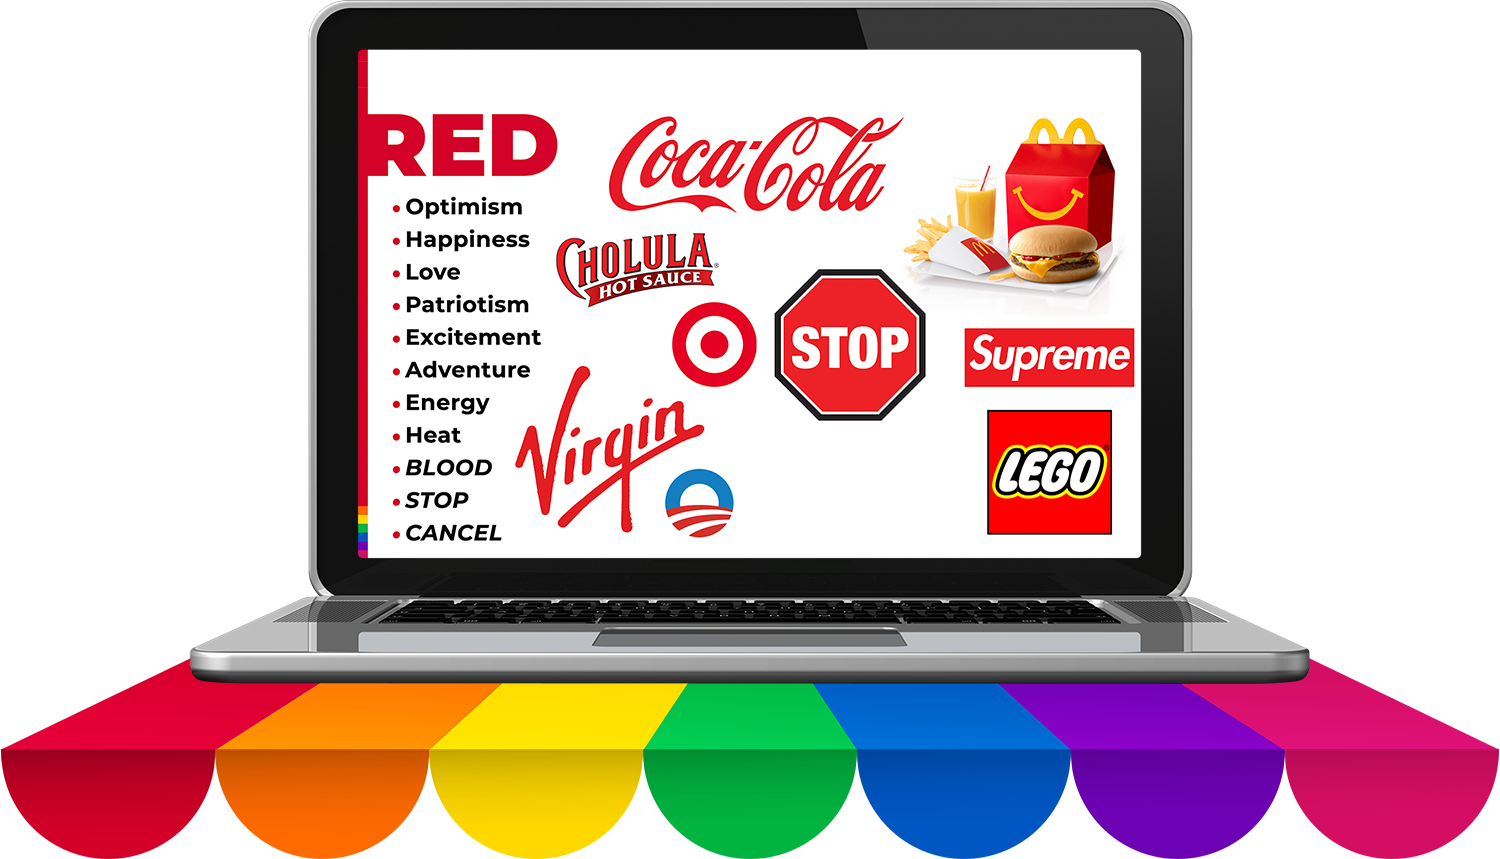 "Why Design Matters" then introduces you to a quick mini-dictionary crash course on the language of design, using memorable logos as guides to the many meanings of color.